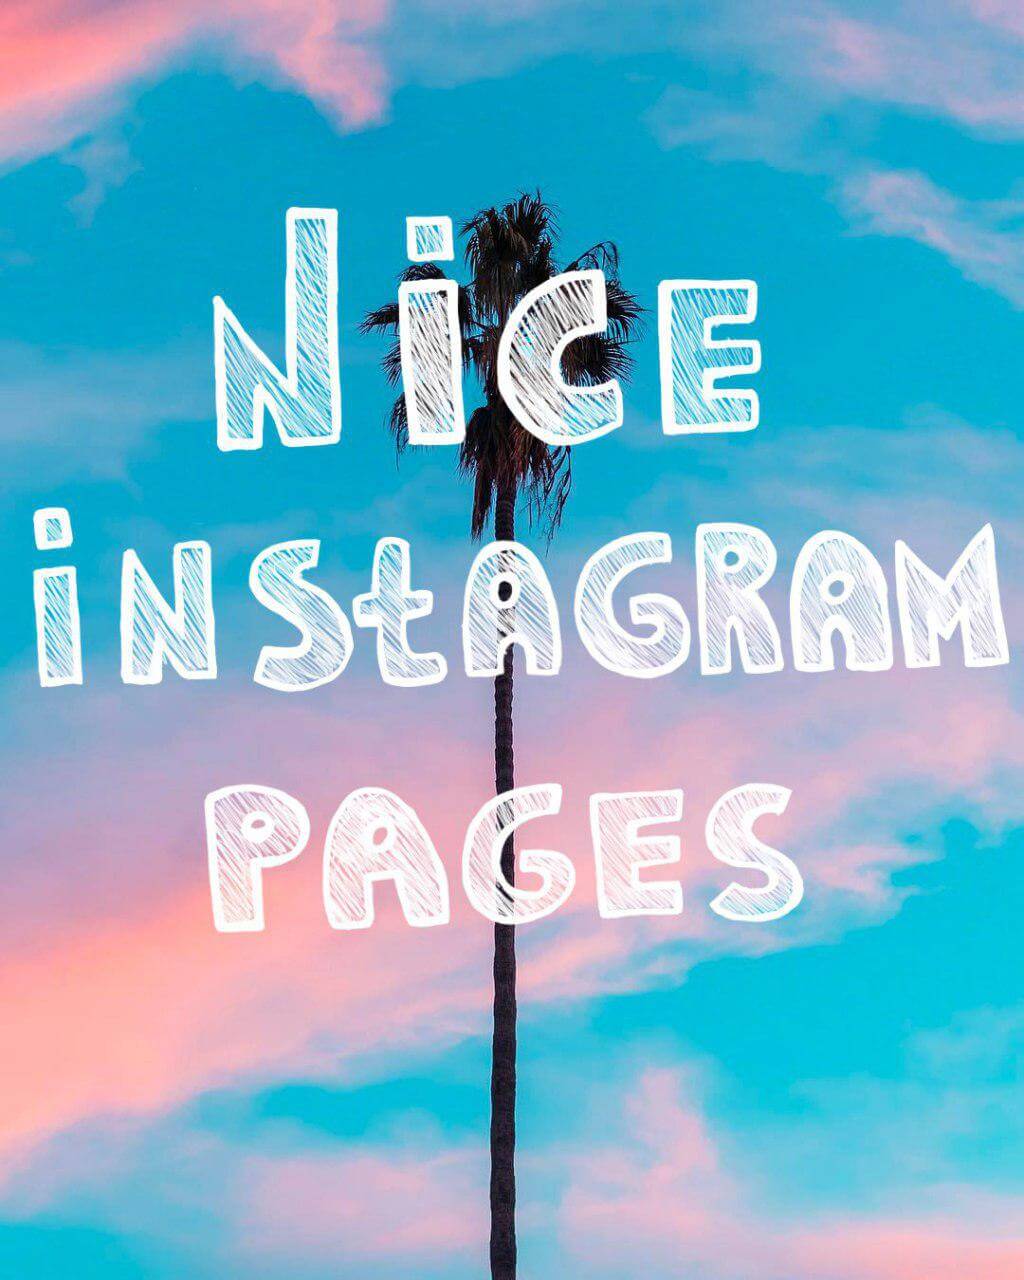 NiceInstPages